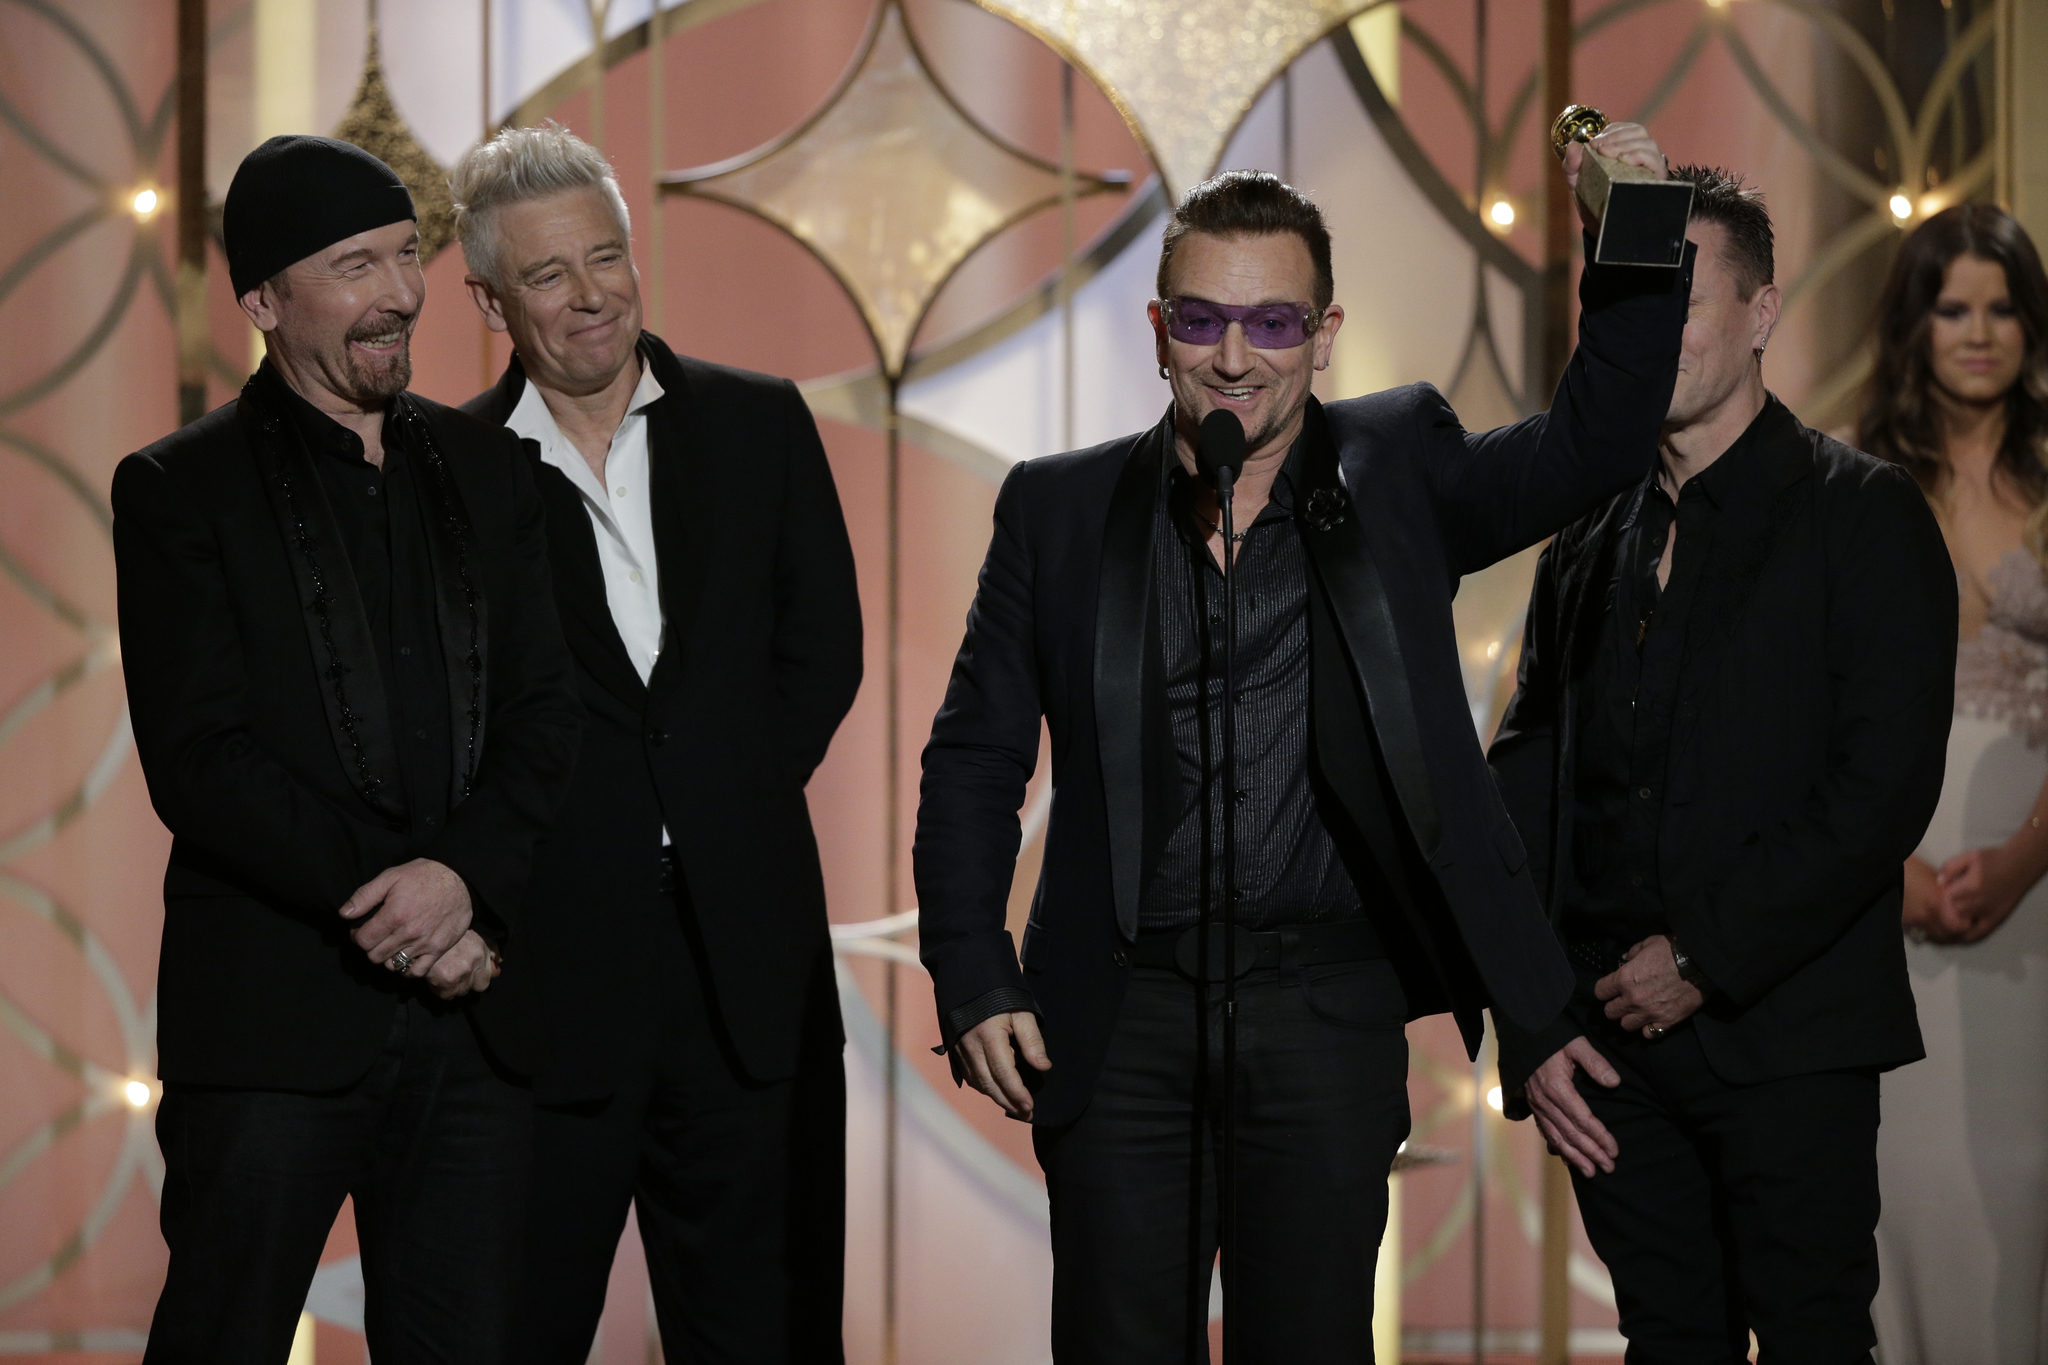 Bono, Adam Clayton, Larry Mullen Jr., The Edge and U2 at event of 71st Golden Globe Awards (2014)